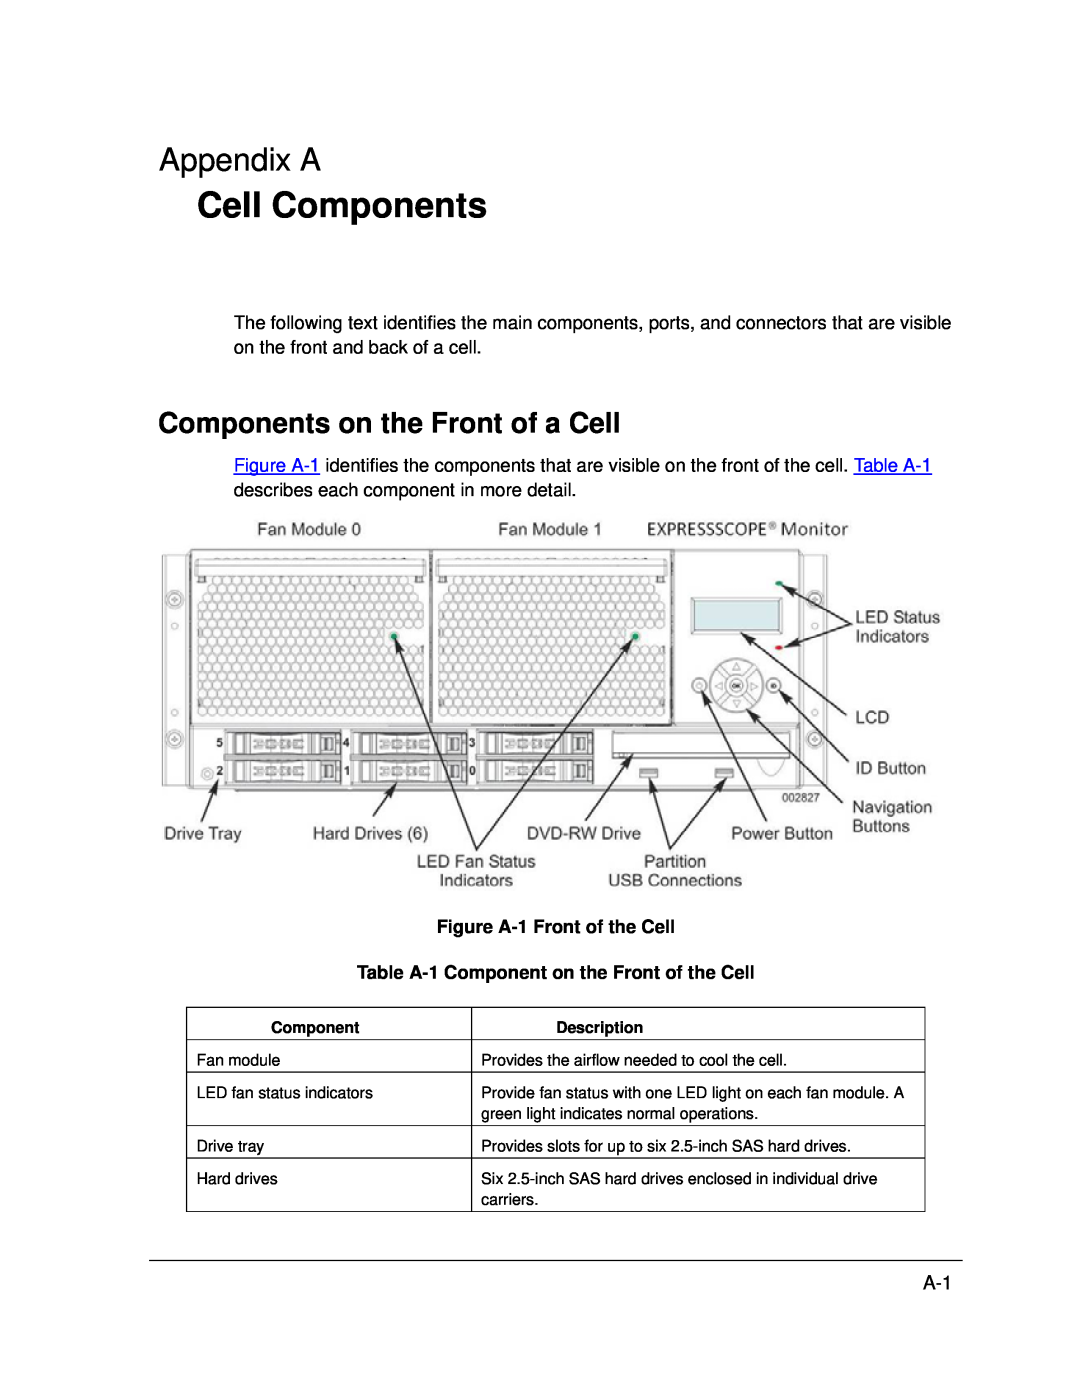 NEC A1160 manual Appendix A, Components on the Front of a Cell, Cell Components, Figure A-1Front of the Cell 